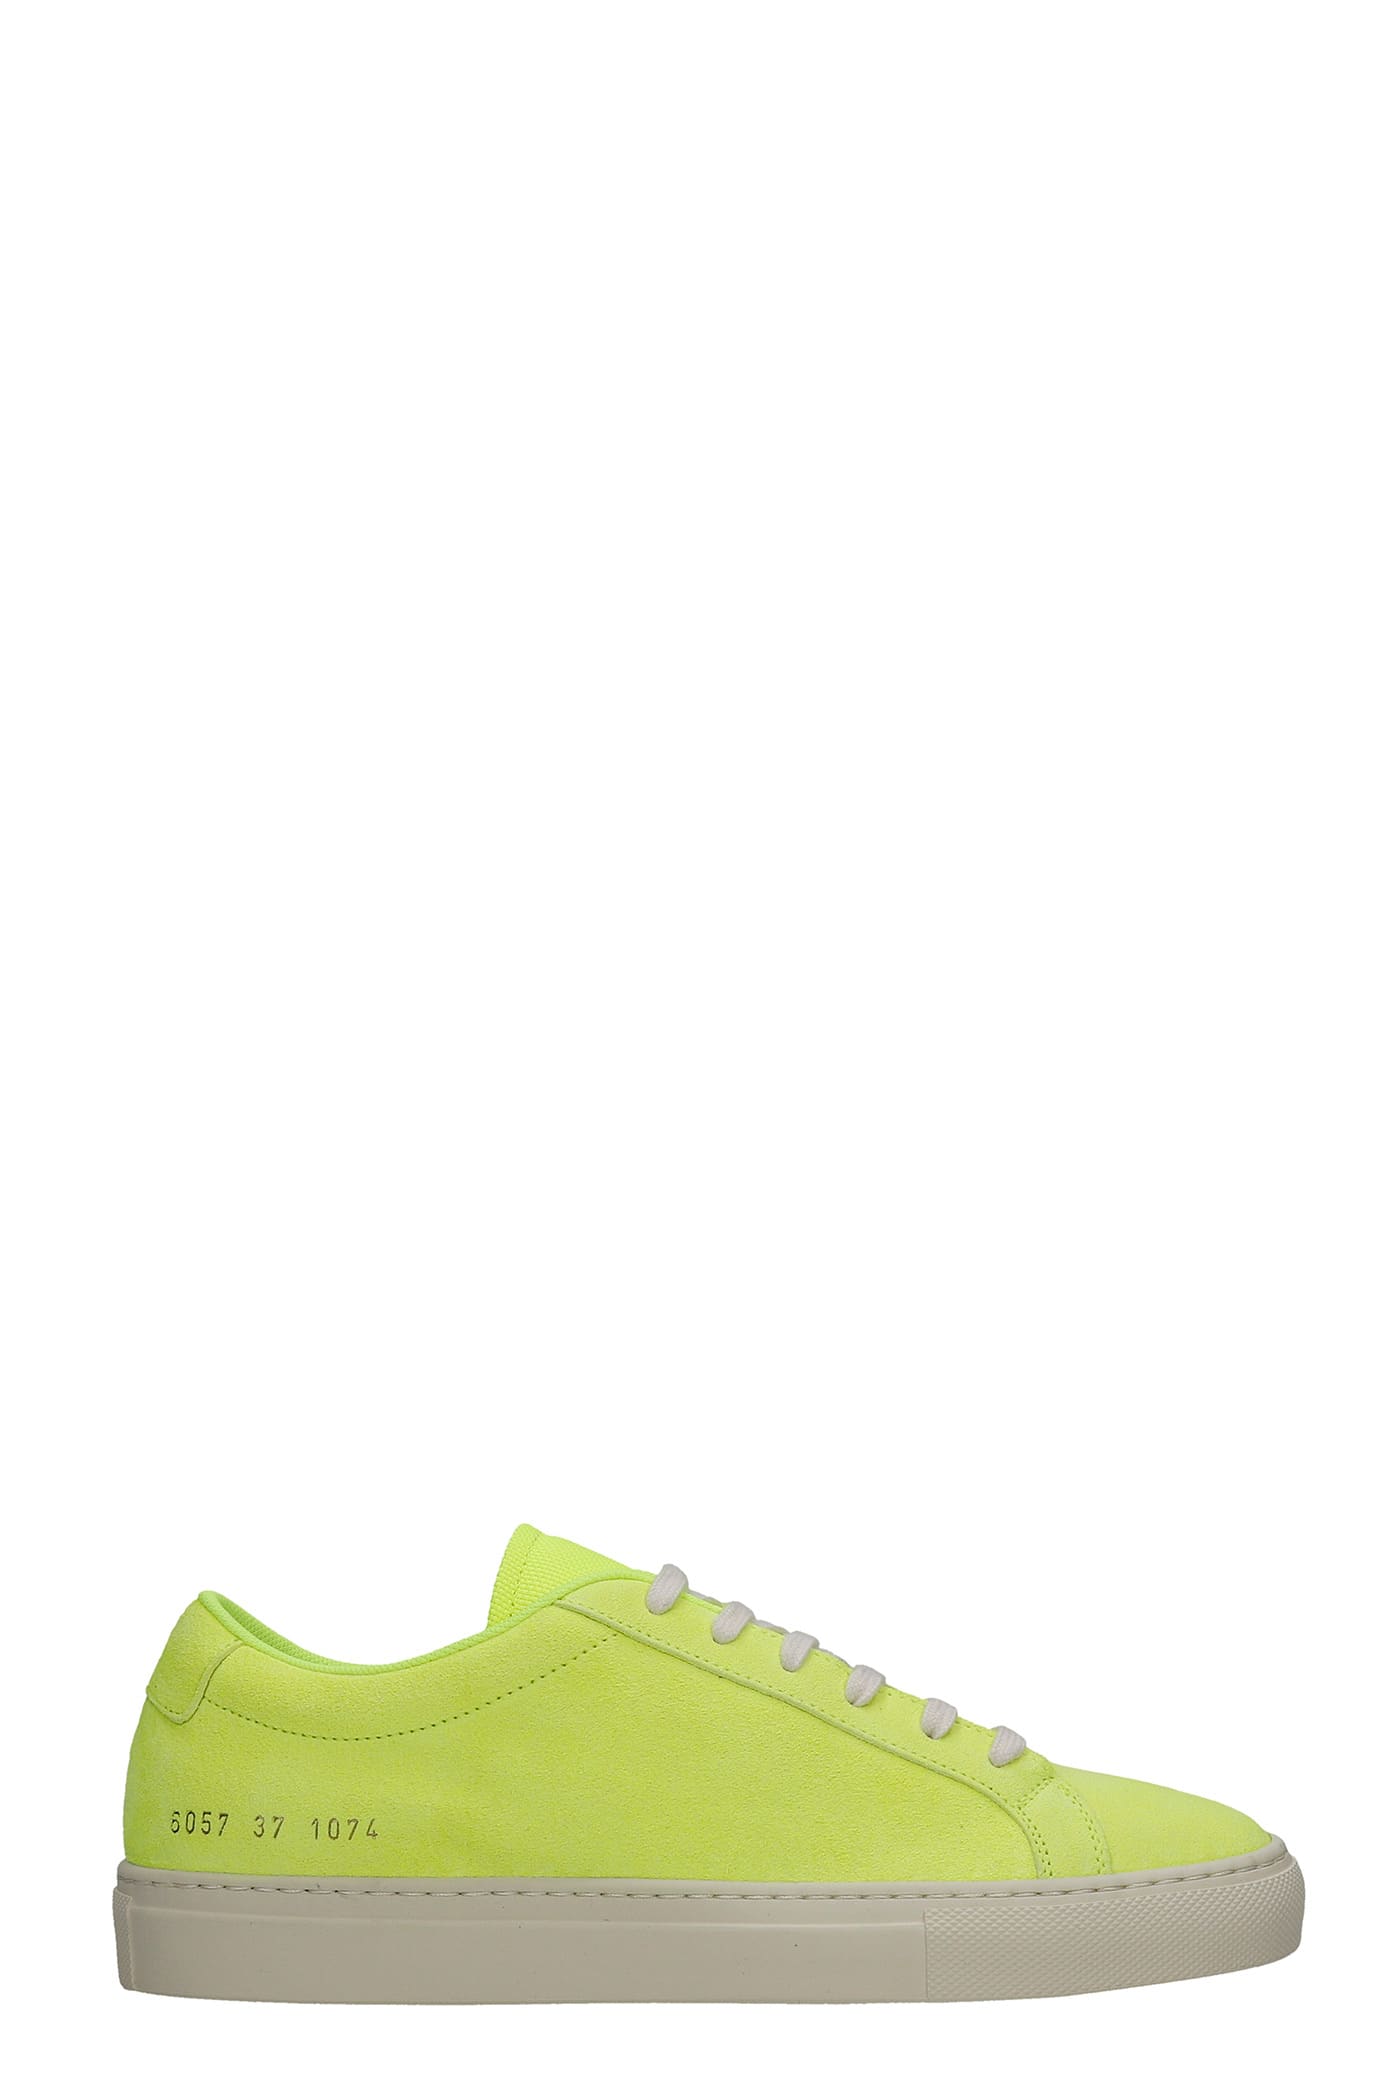 COMMON PROJECTS ACHILLE FLUO SNEAKERS IN YELLOW SUEDE,60571074